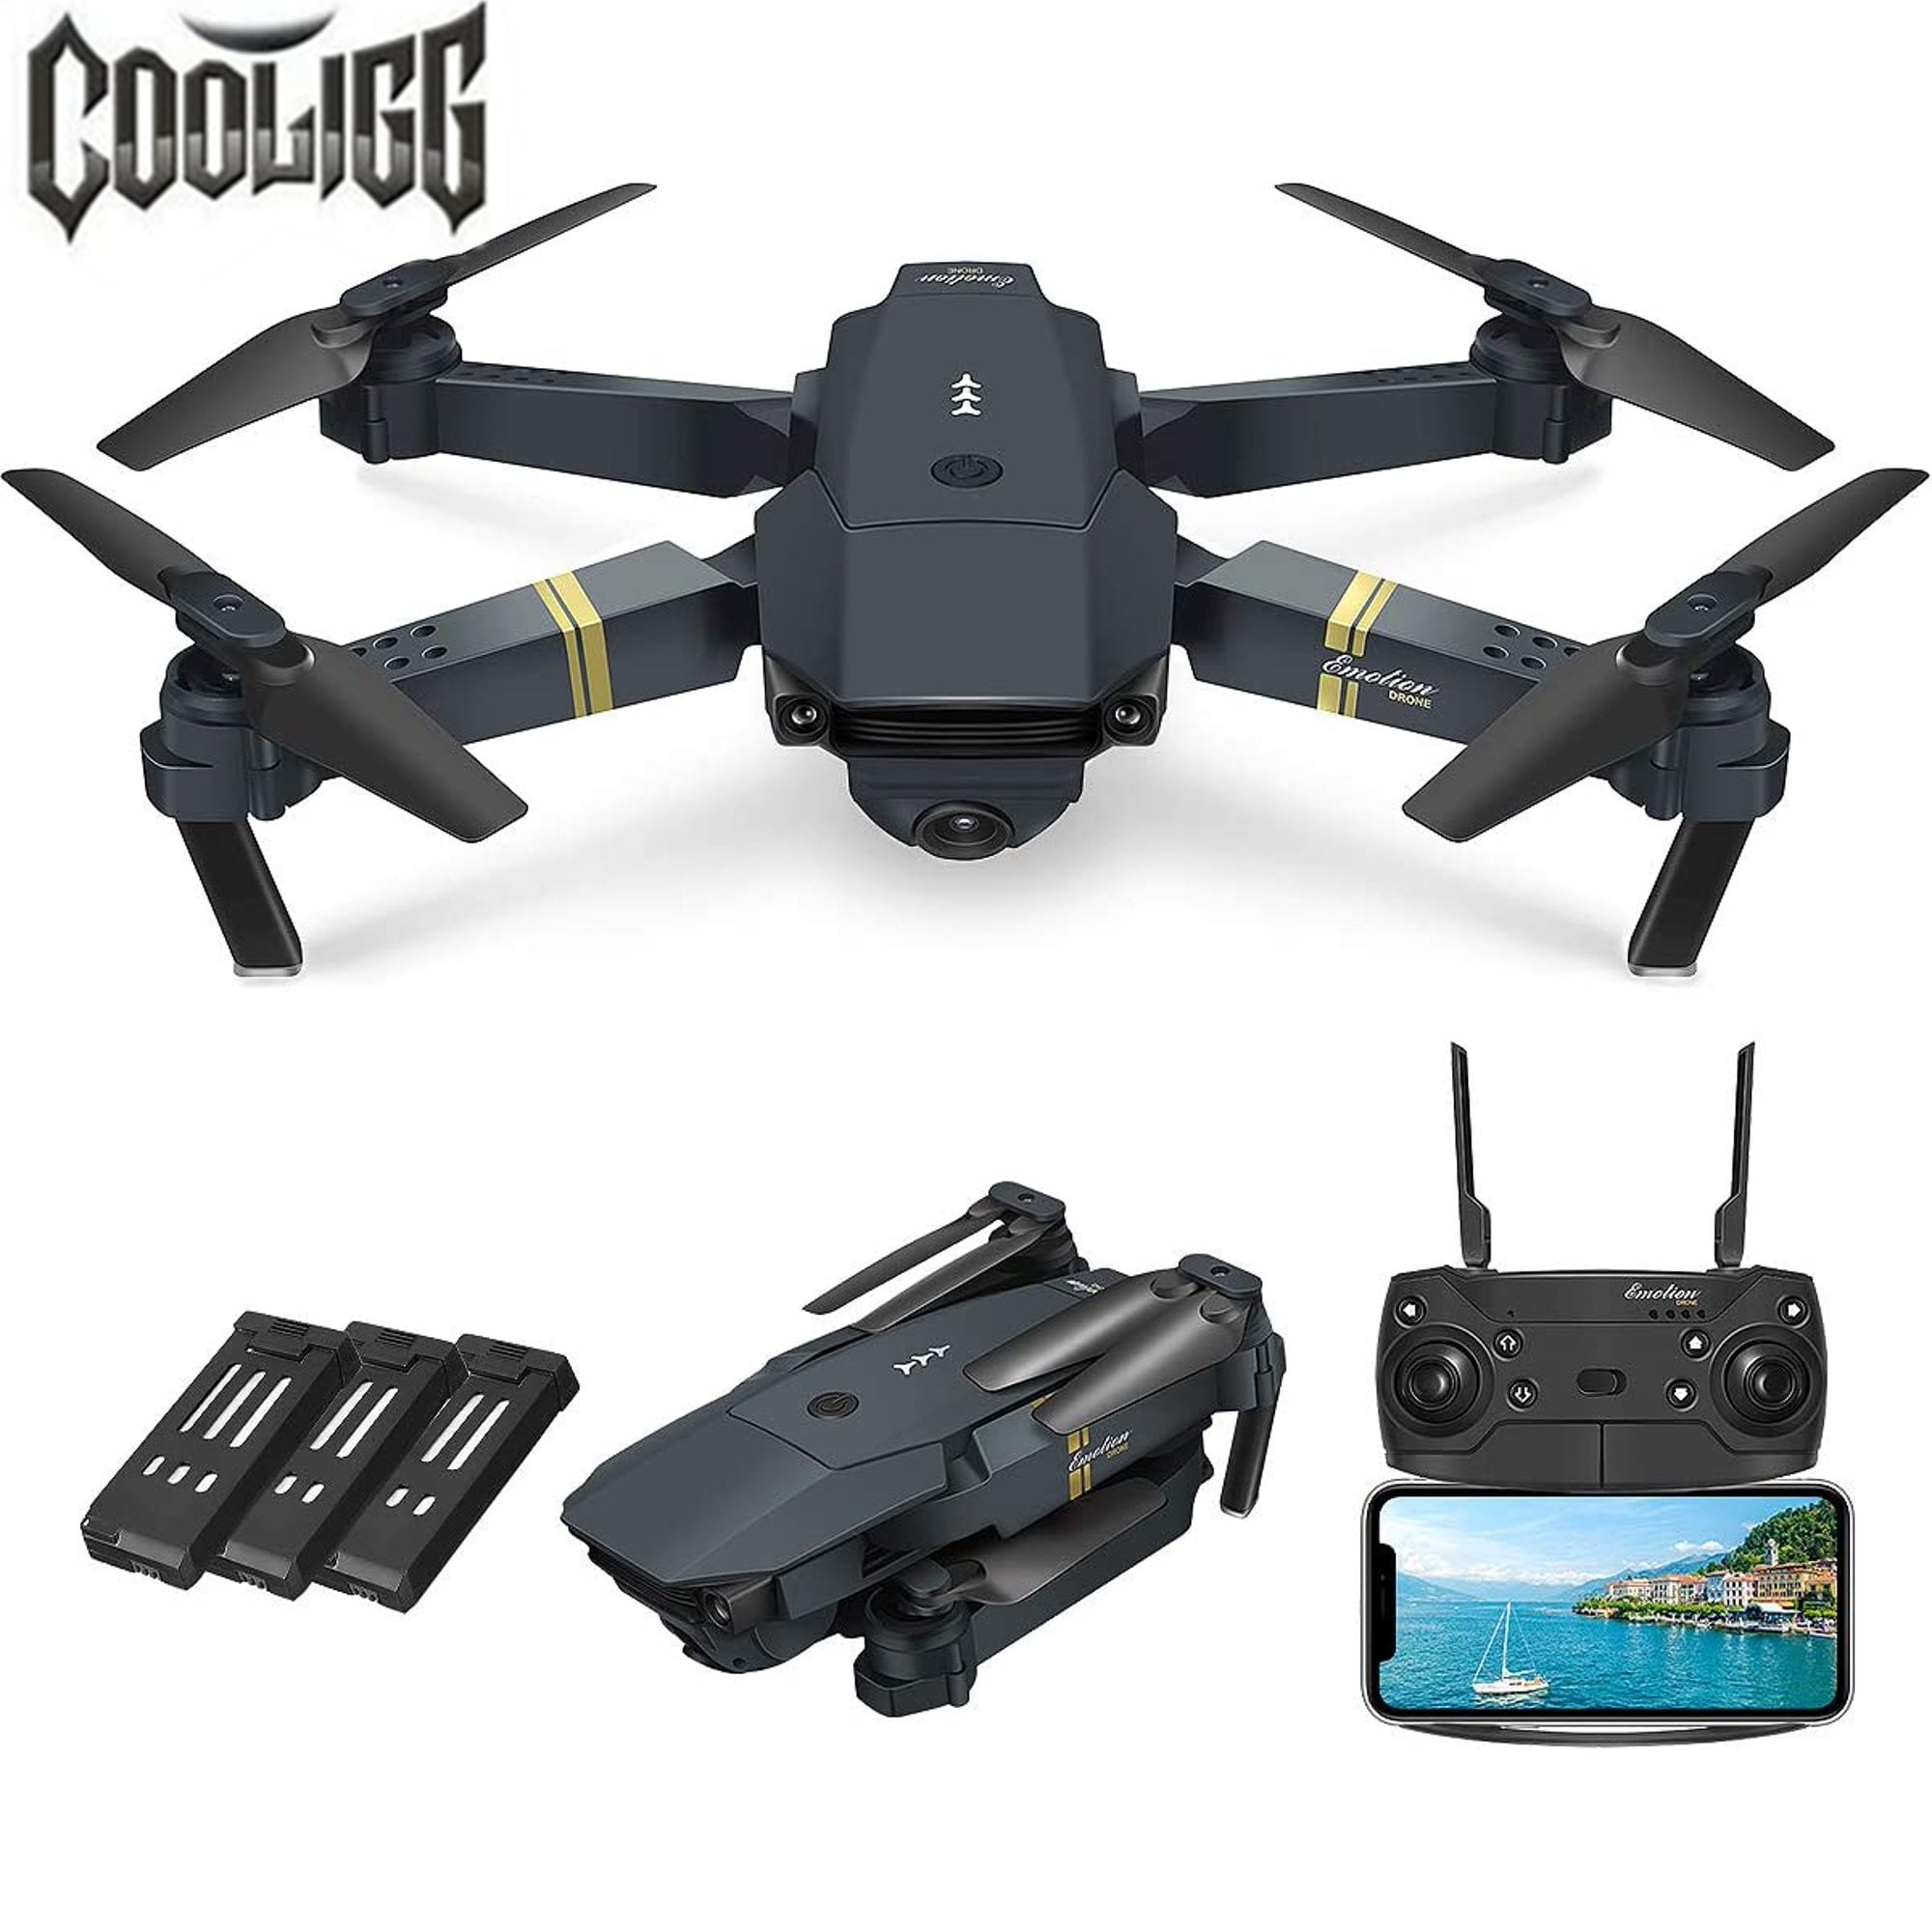 Cooligg S168-X Drone Quadcopter Mavic Pro with RC 720p HD Camera 2MP WIFI FPV Foldable Arm Selfie 6 Axis + 3PCS Batteries